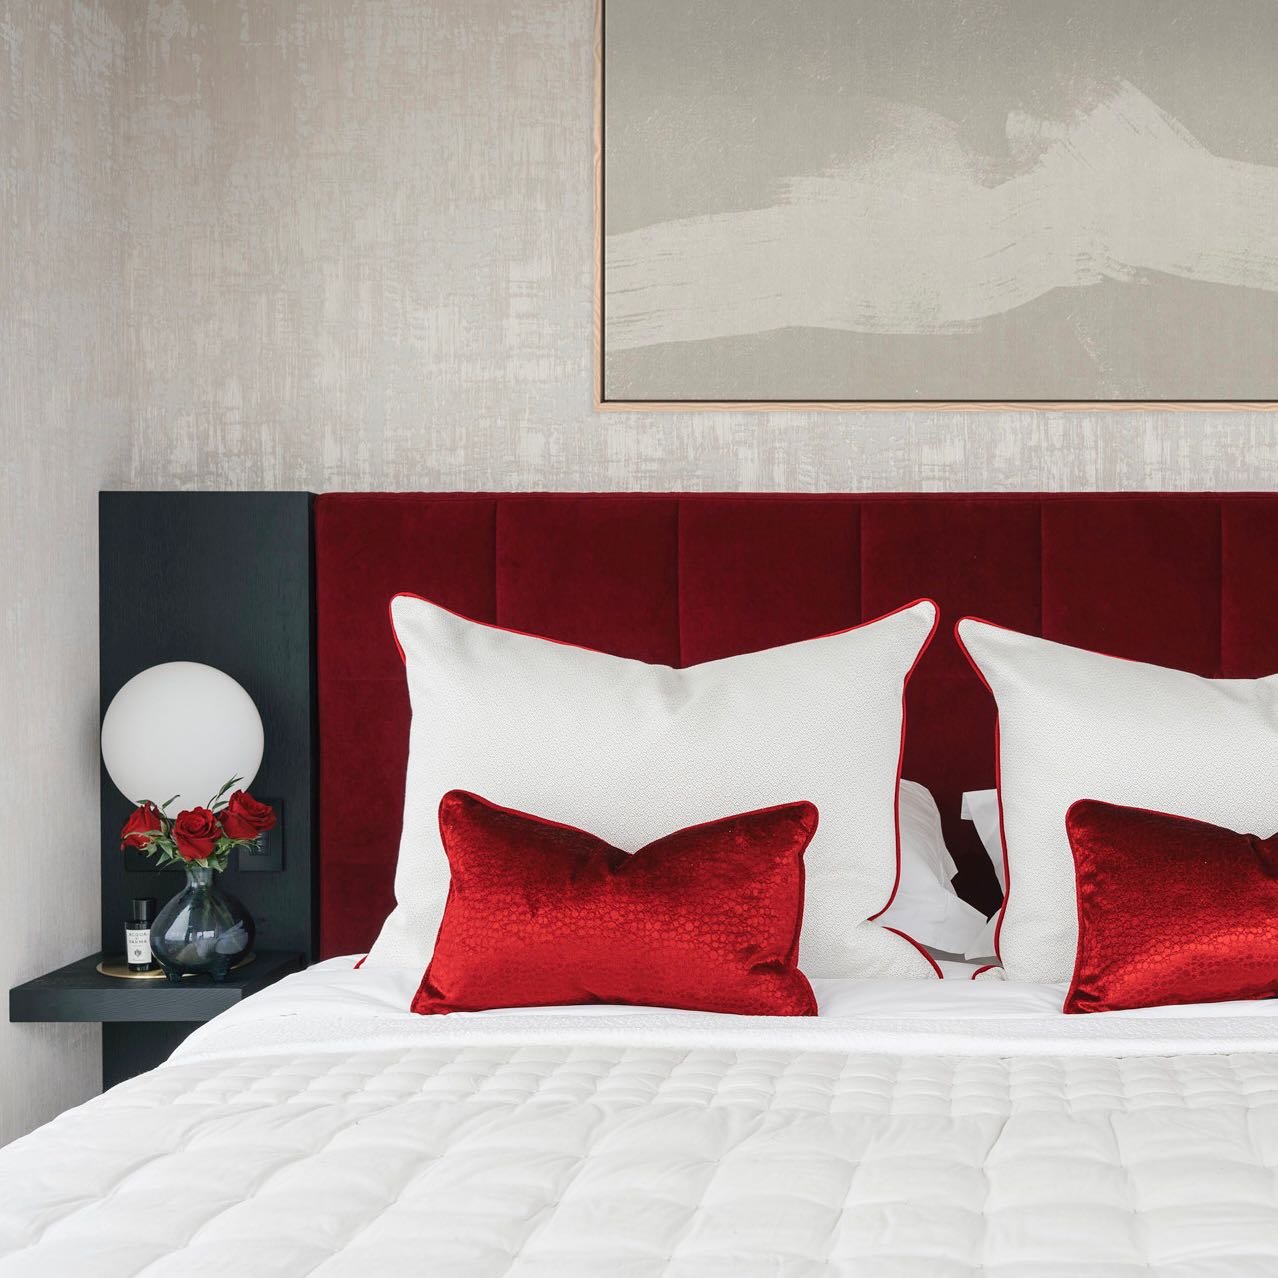 An example of how styling can change the vibe of a design as shown in the guest bedroom of our @onetowerbridge project. 

Image 1 we styled the bed with a simple neutral quilted bedspread. Clean and sophisticated. 

Image 2 we styled the bed with a m